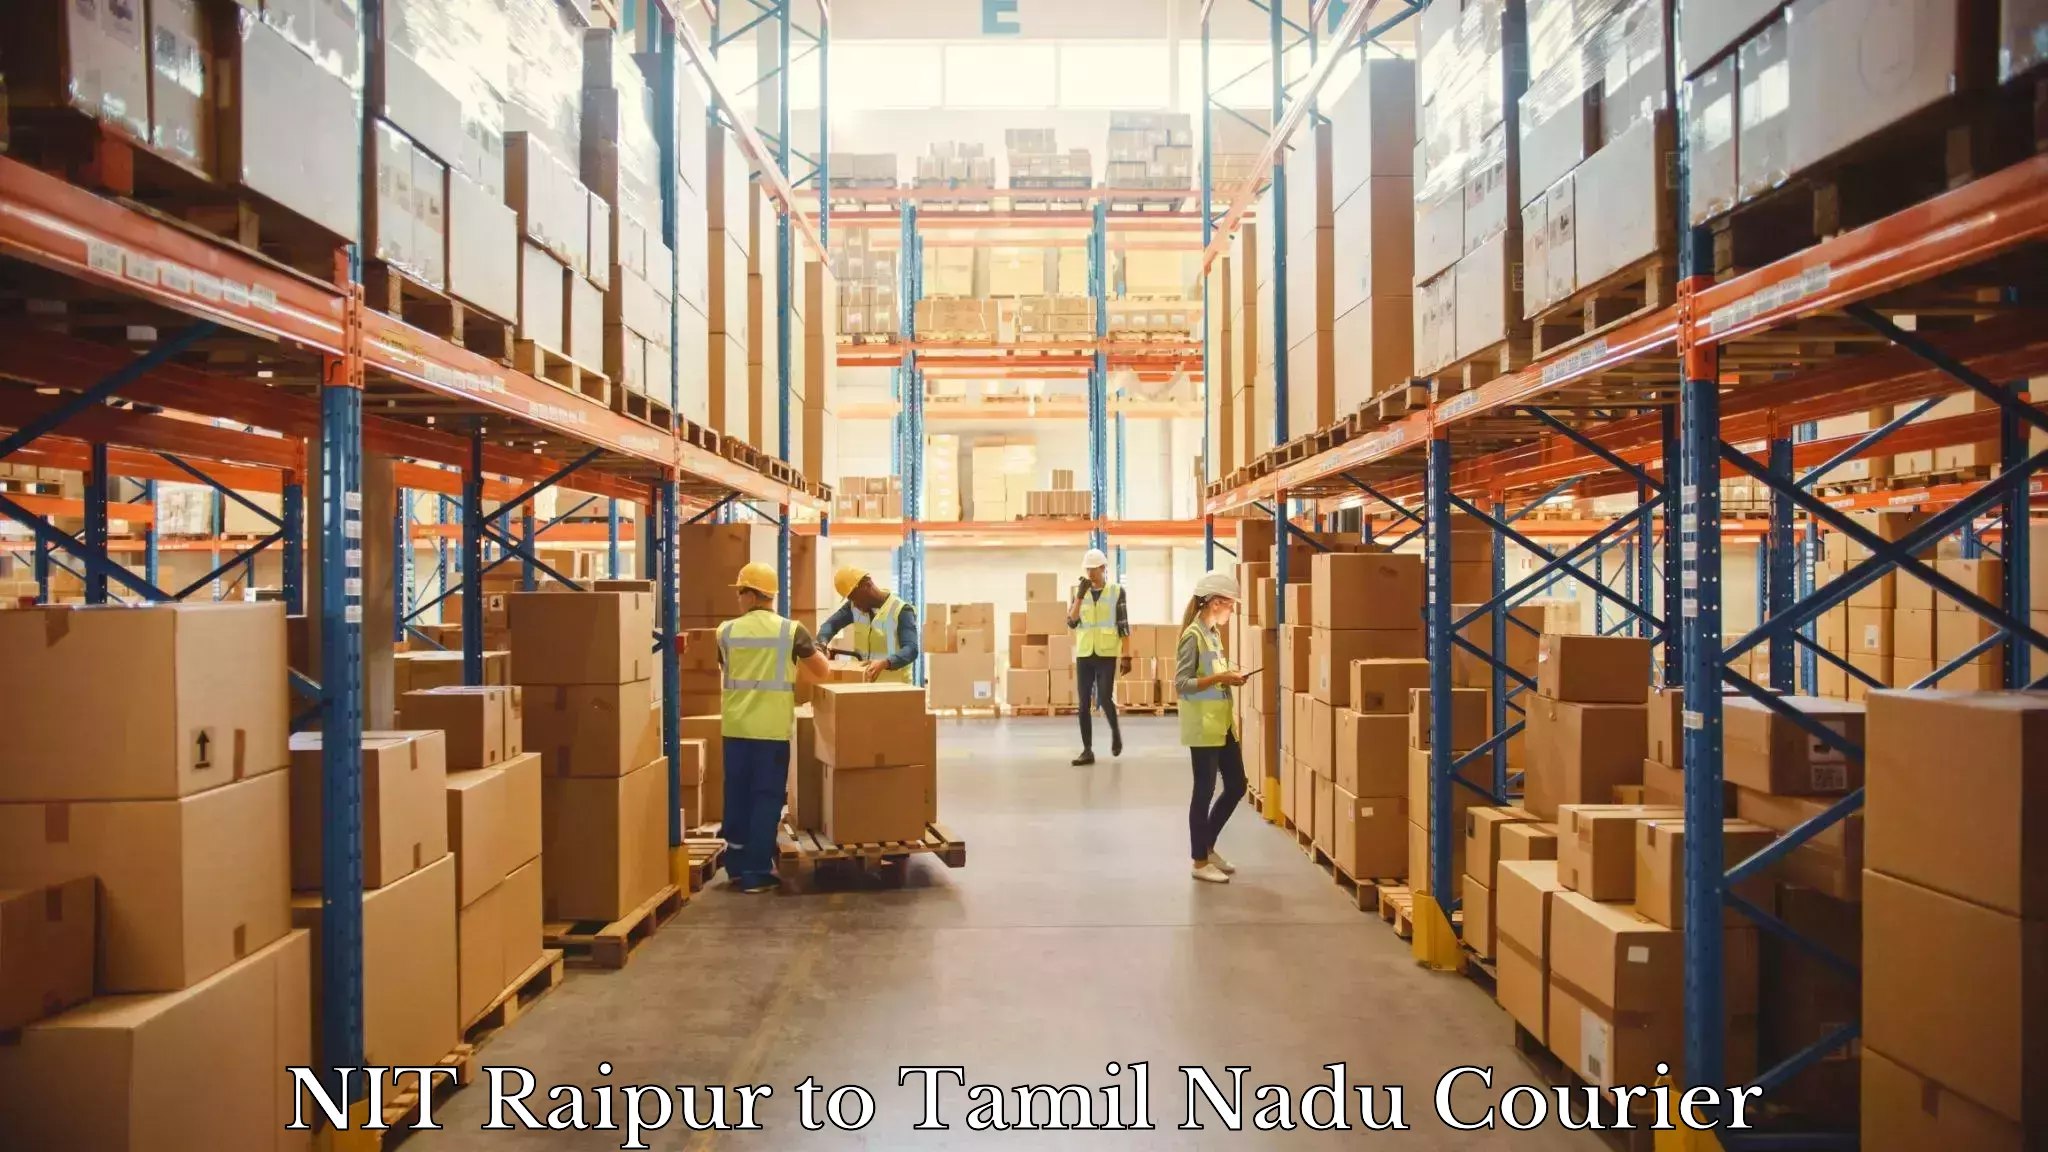 Reliable courier services NIT Raipur to Ennore Port Chennai